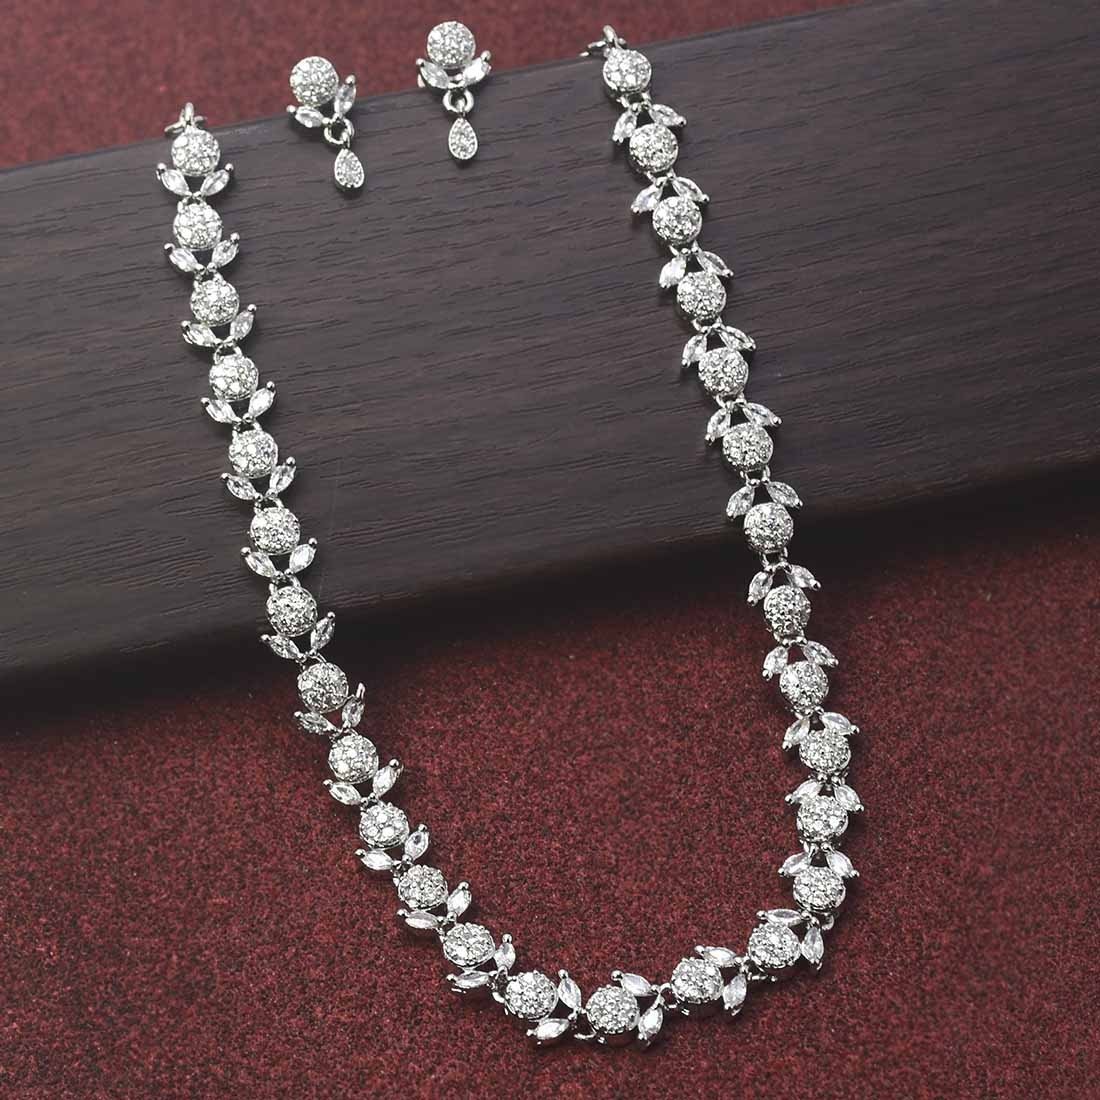 Oval Cut White Heavy American Diamond Necklace Set at Best Price in Mumbai  | Vivah Creation